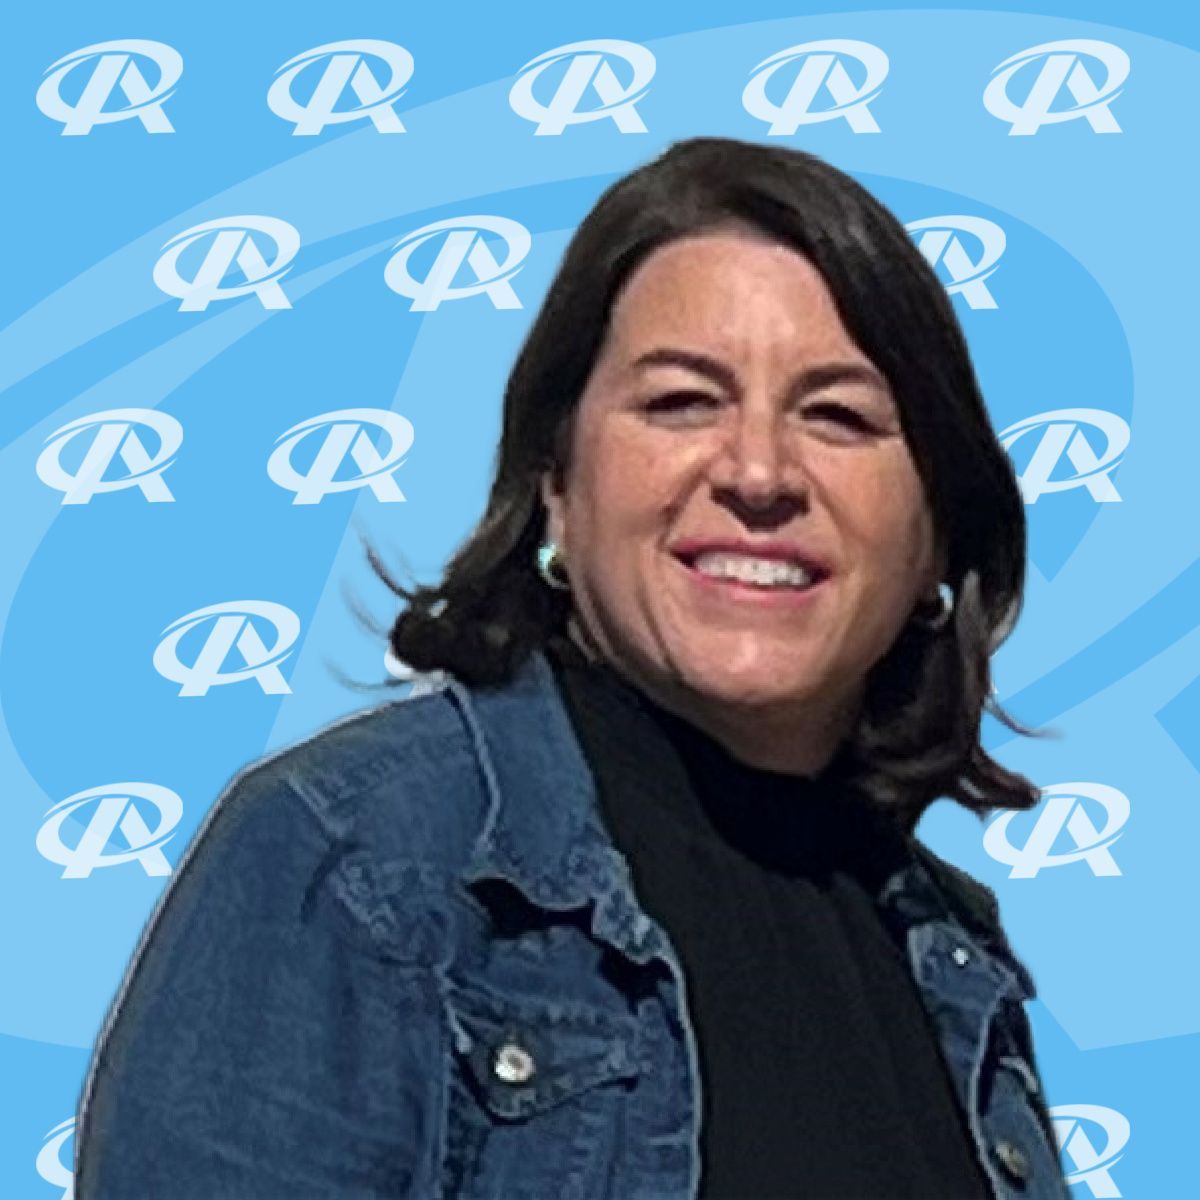 A woman in a denim jacket is smiling in front of a blue background with the letter r on it